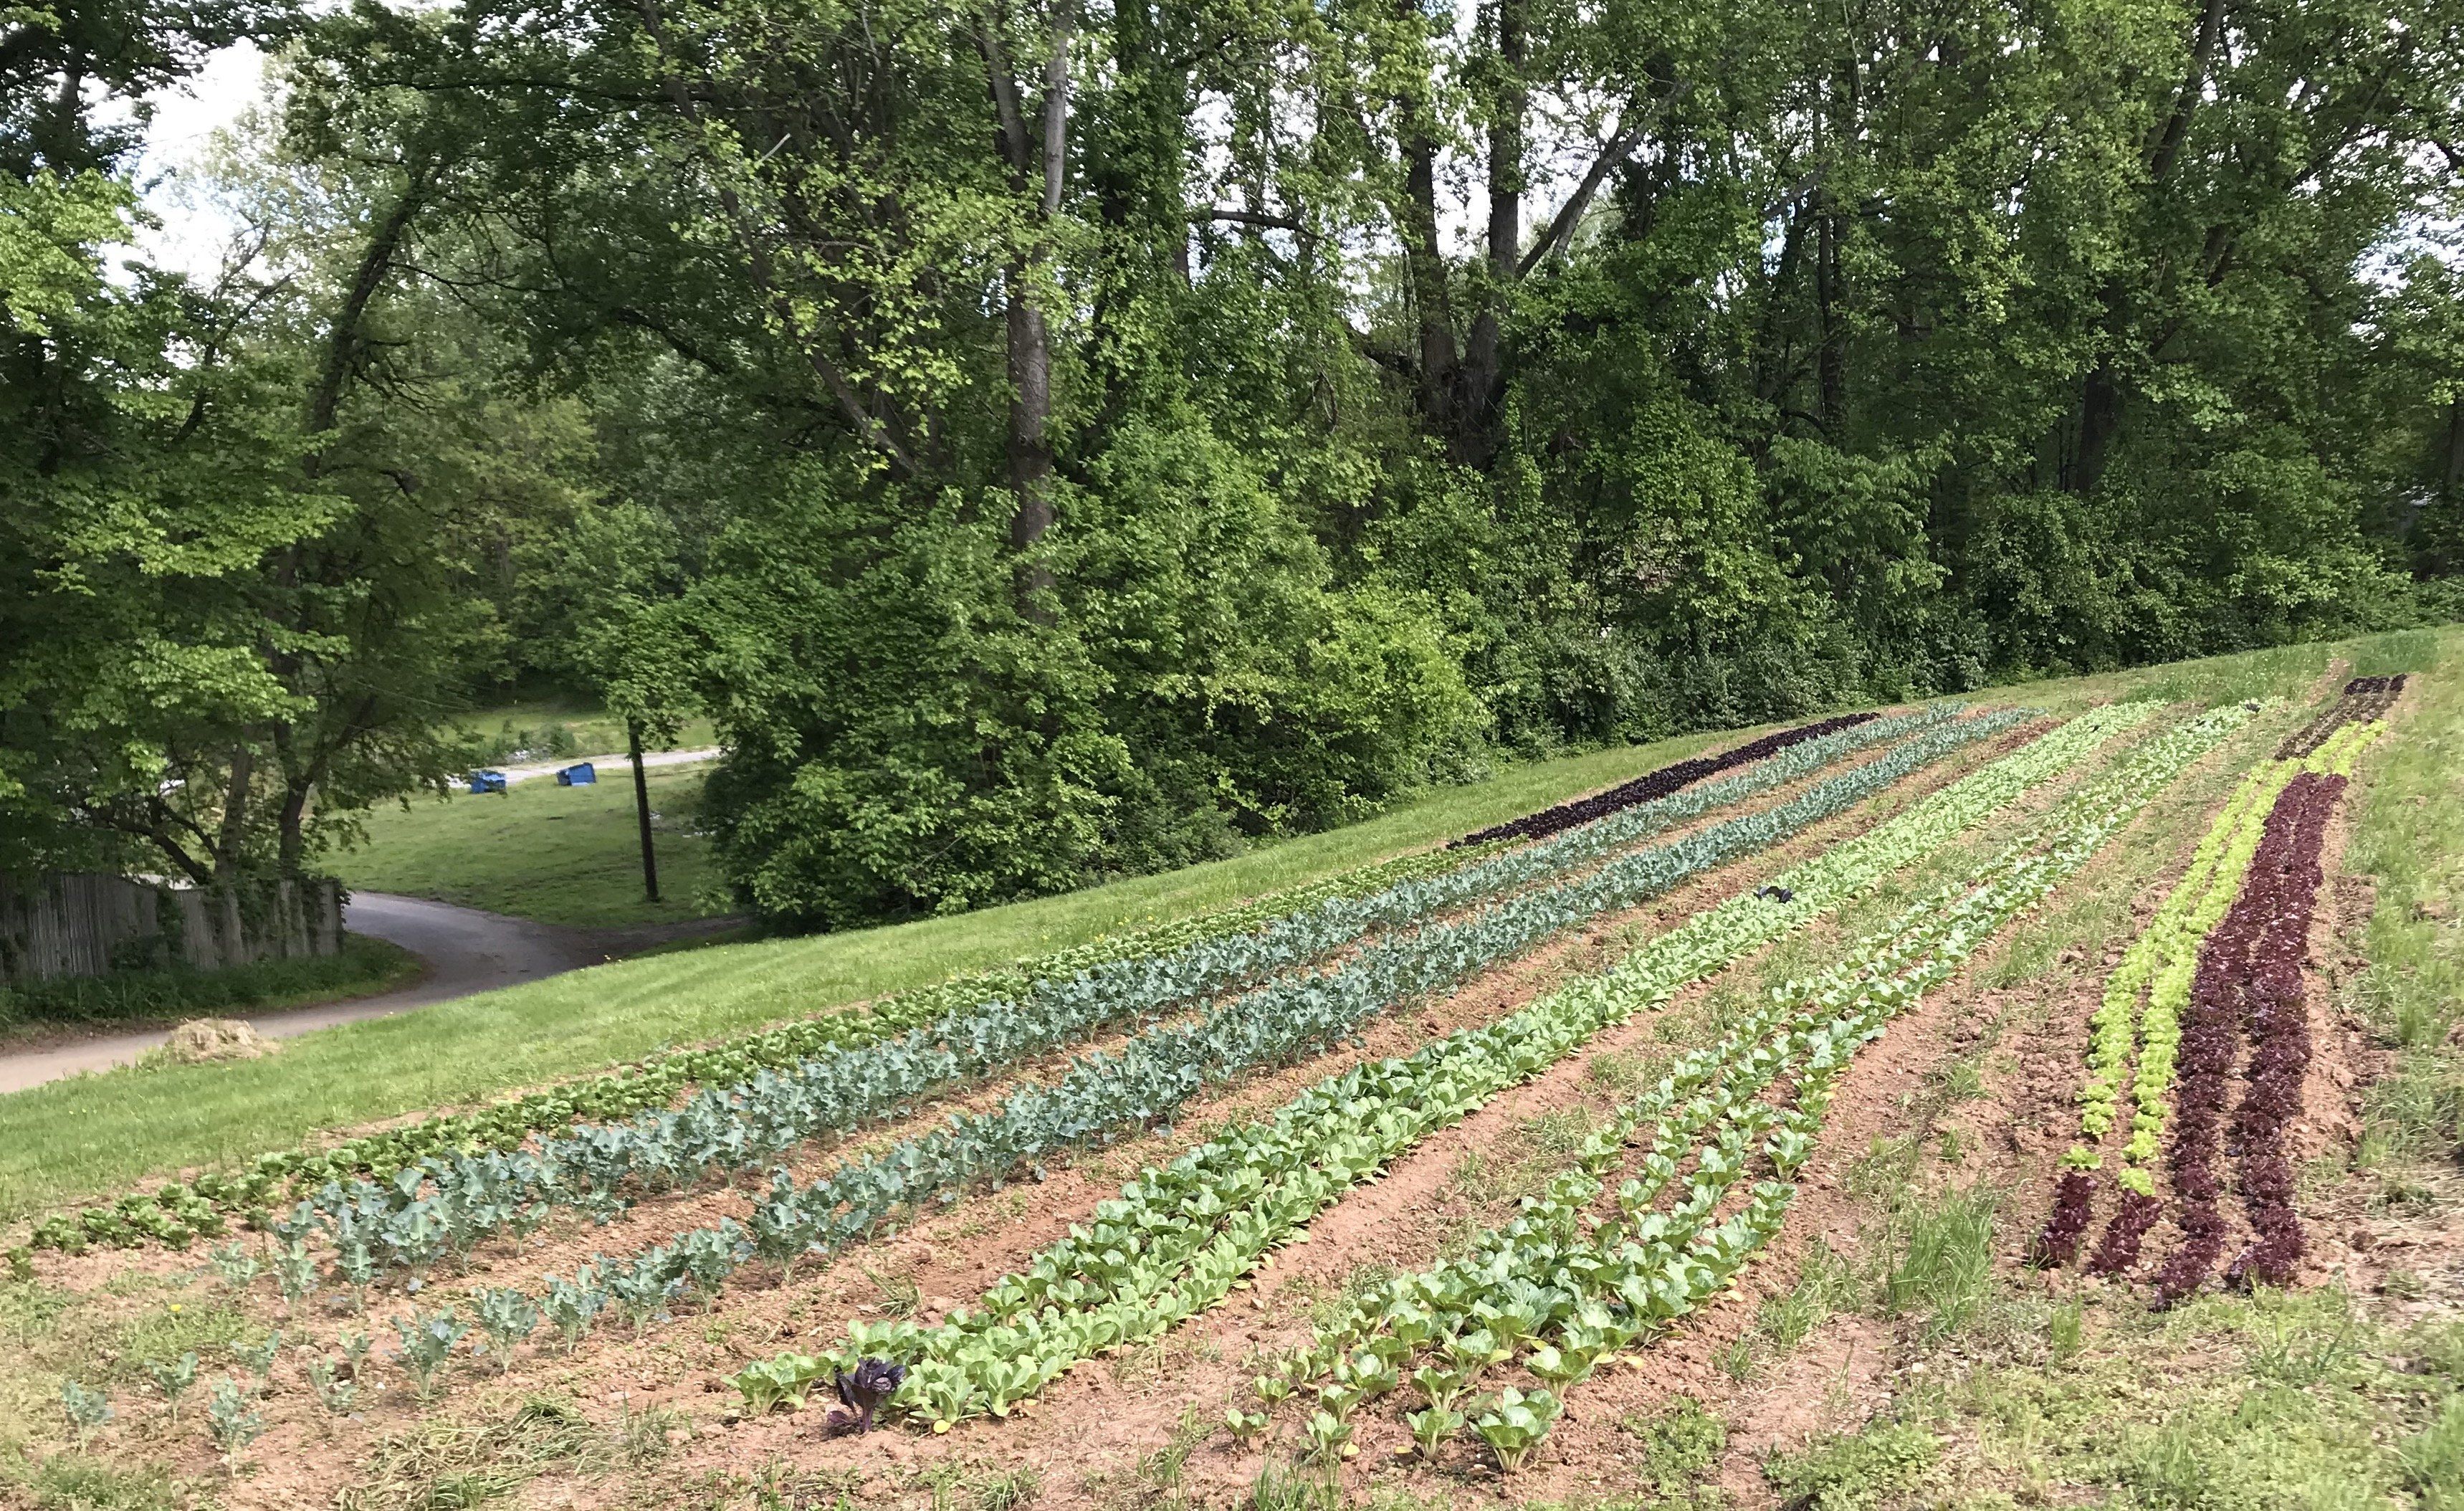 Previous Happening: Farm Happenings for May 30, 2020